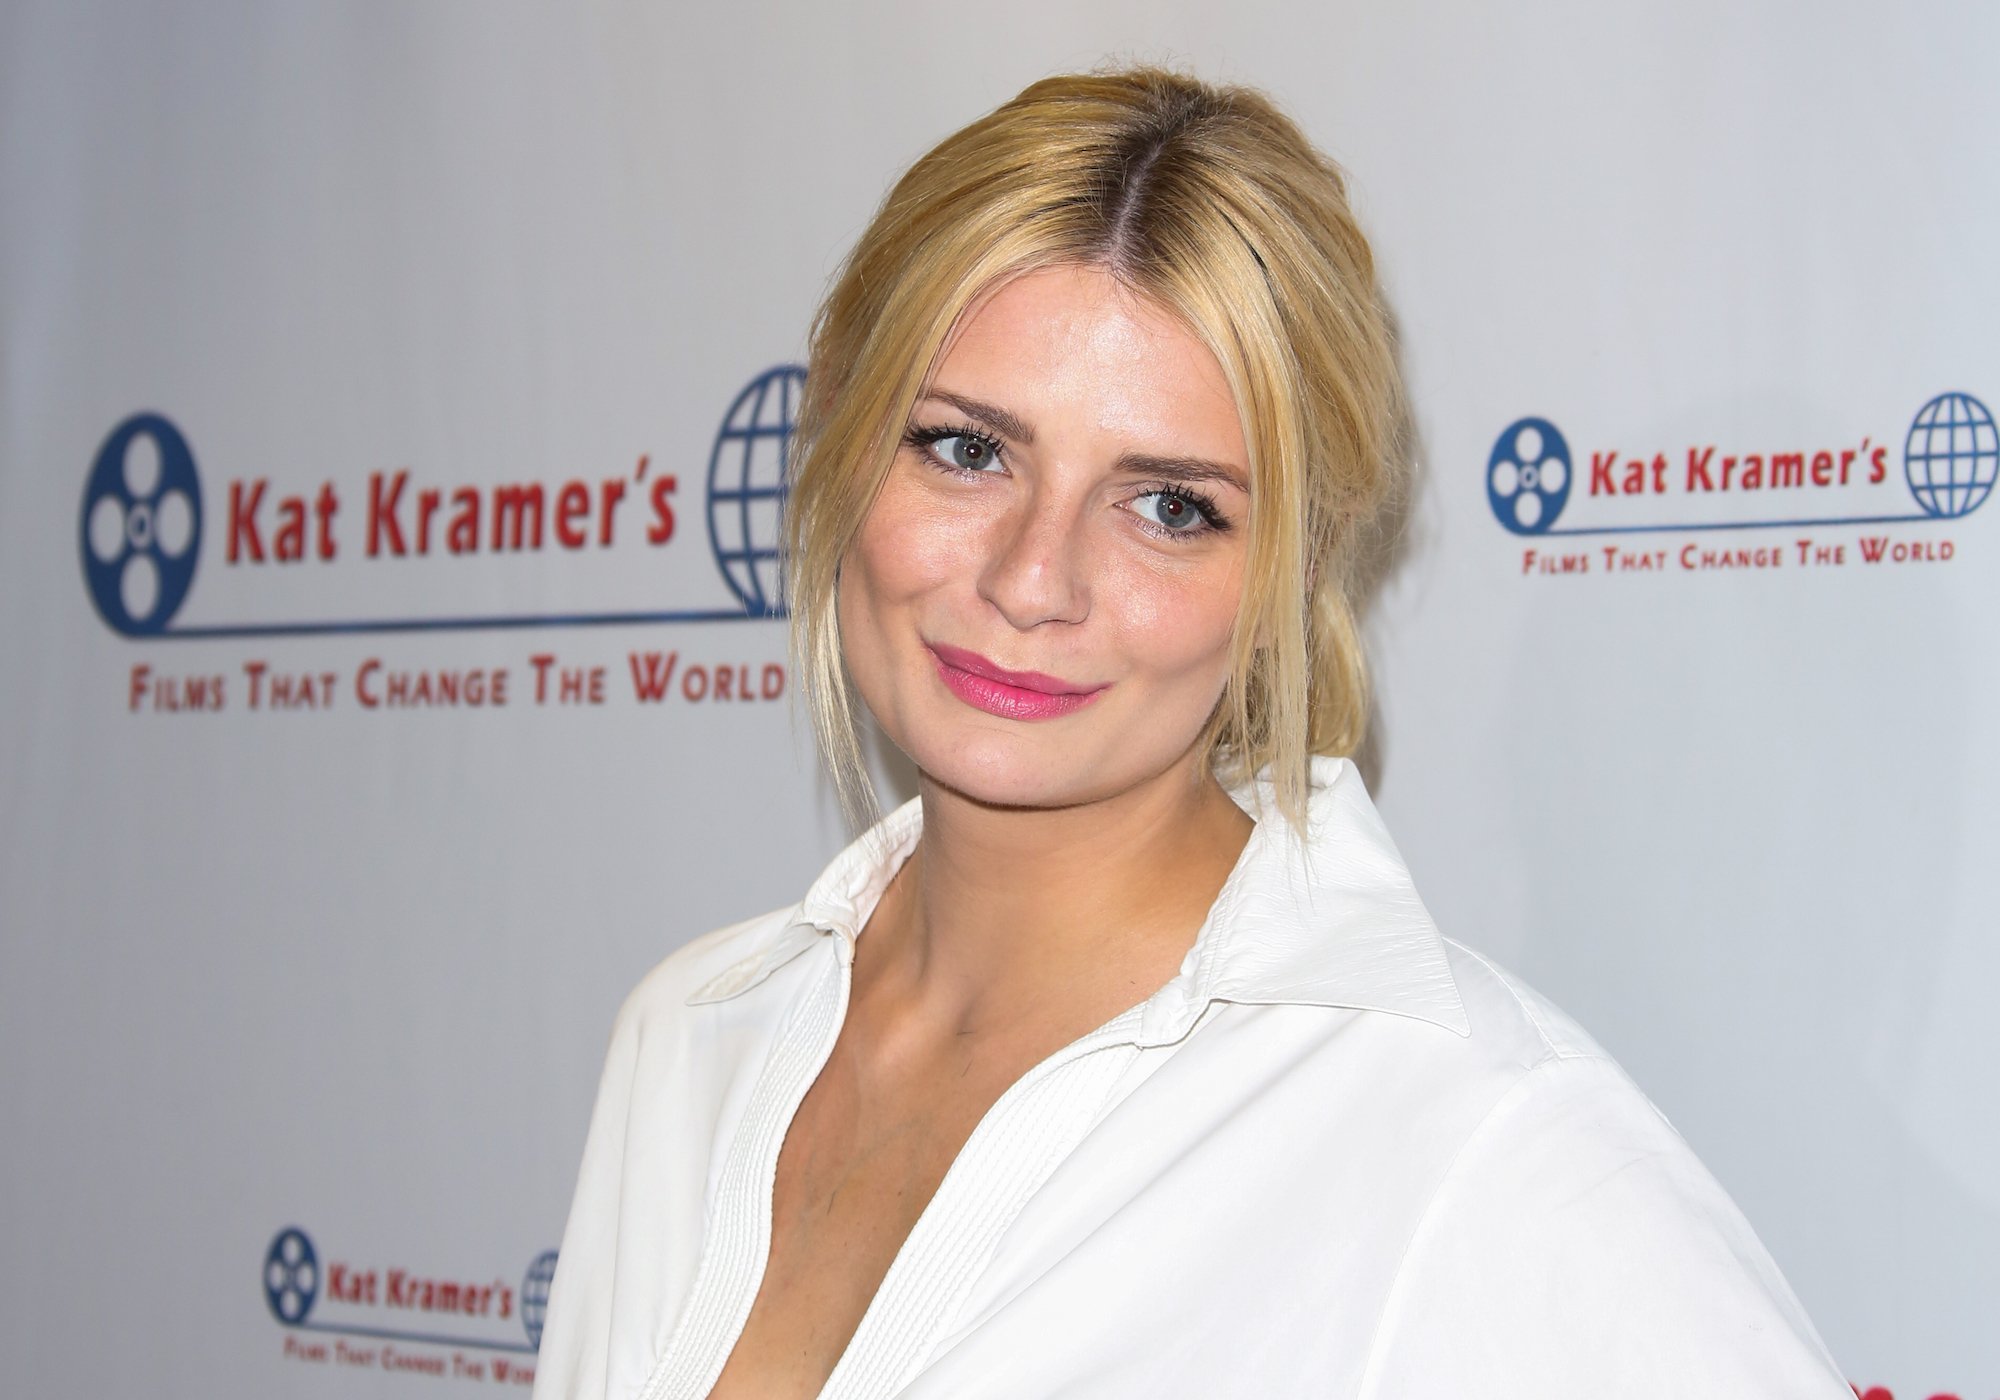 Mischa Barton’s Comments In an Old Interview Would Never Fly Today